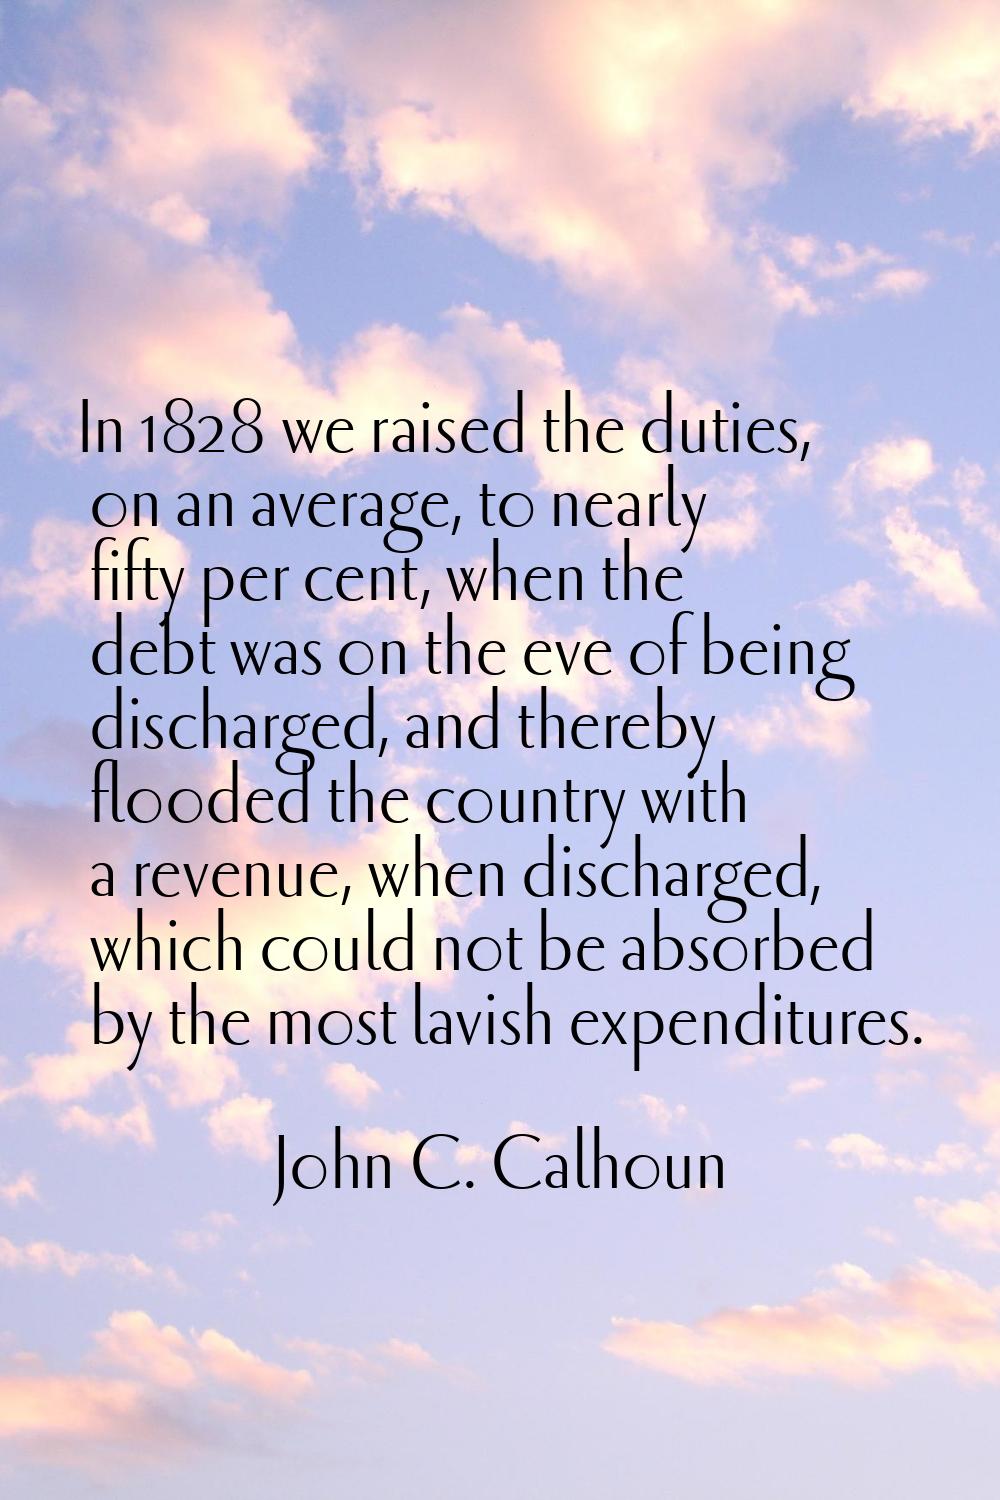 In 1828 we raised the duties, on an average, to nearly fifty per cent, when the debt was on the eve